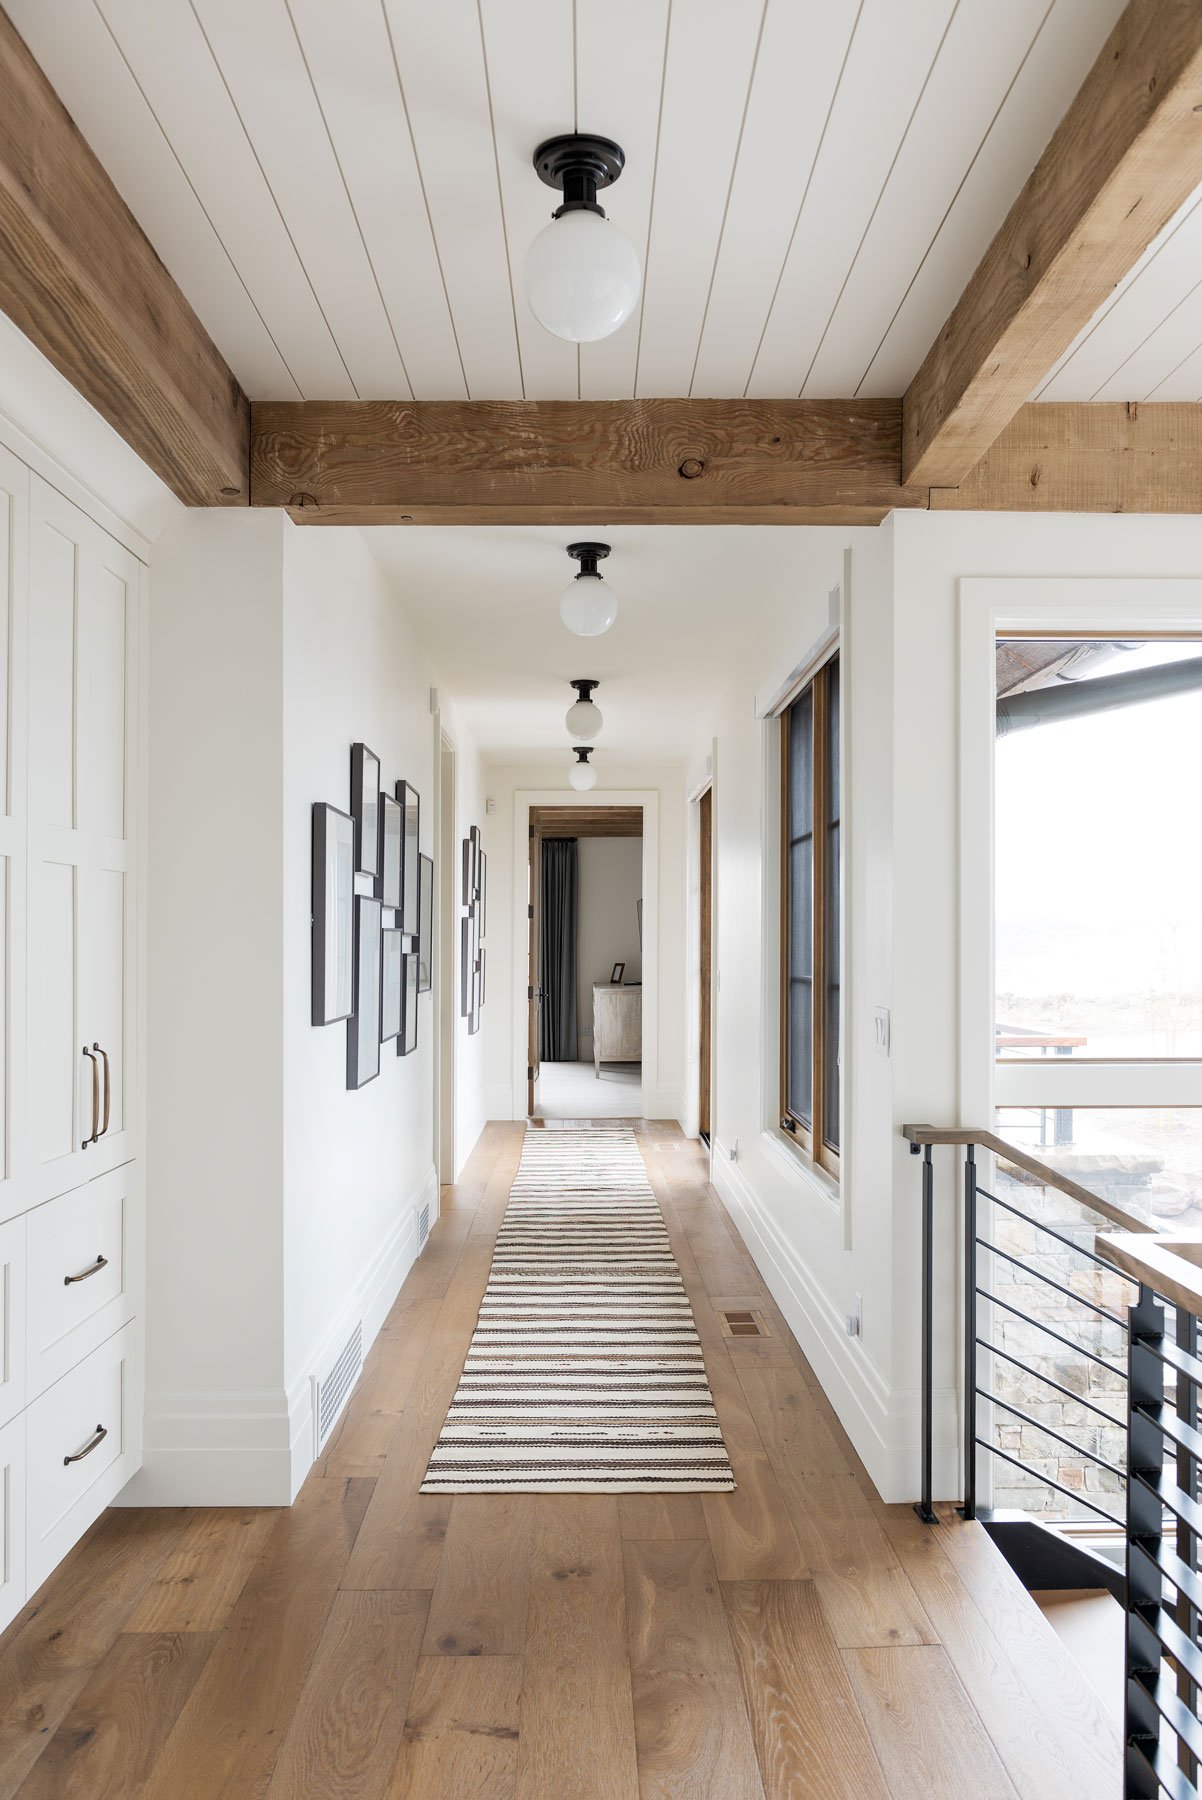 White walls in a hallway with wooden beams overhead and medium toned wood floors